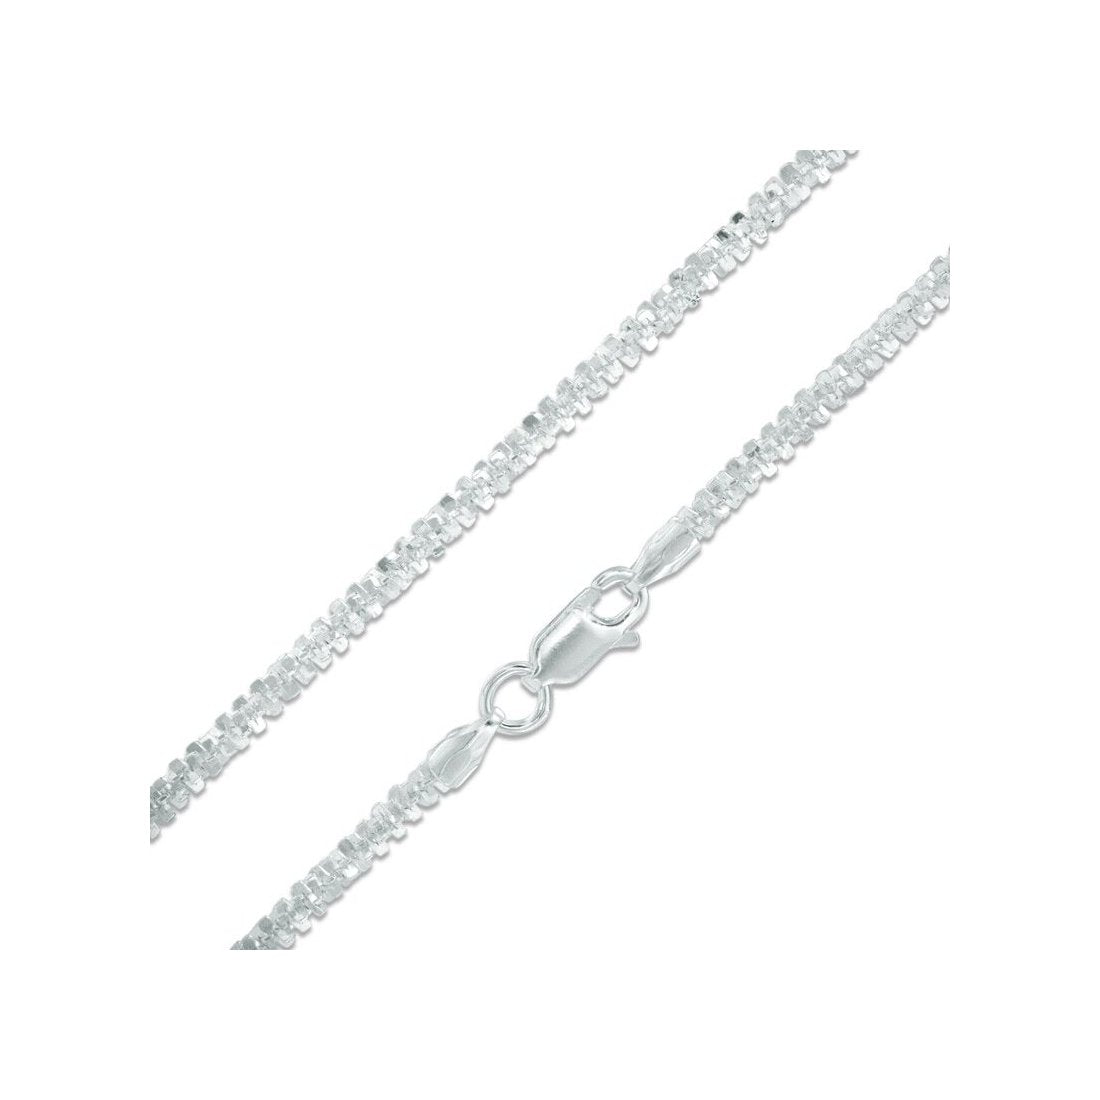 1.4MM Criss Cross Chain .925 Solid Sterling Silver Available In "16-20"